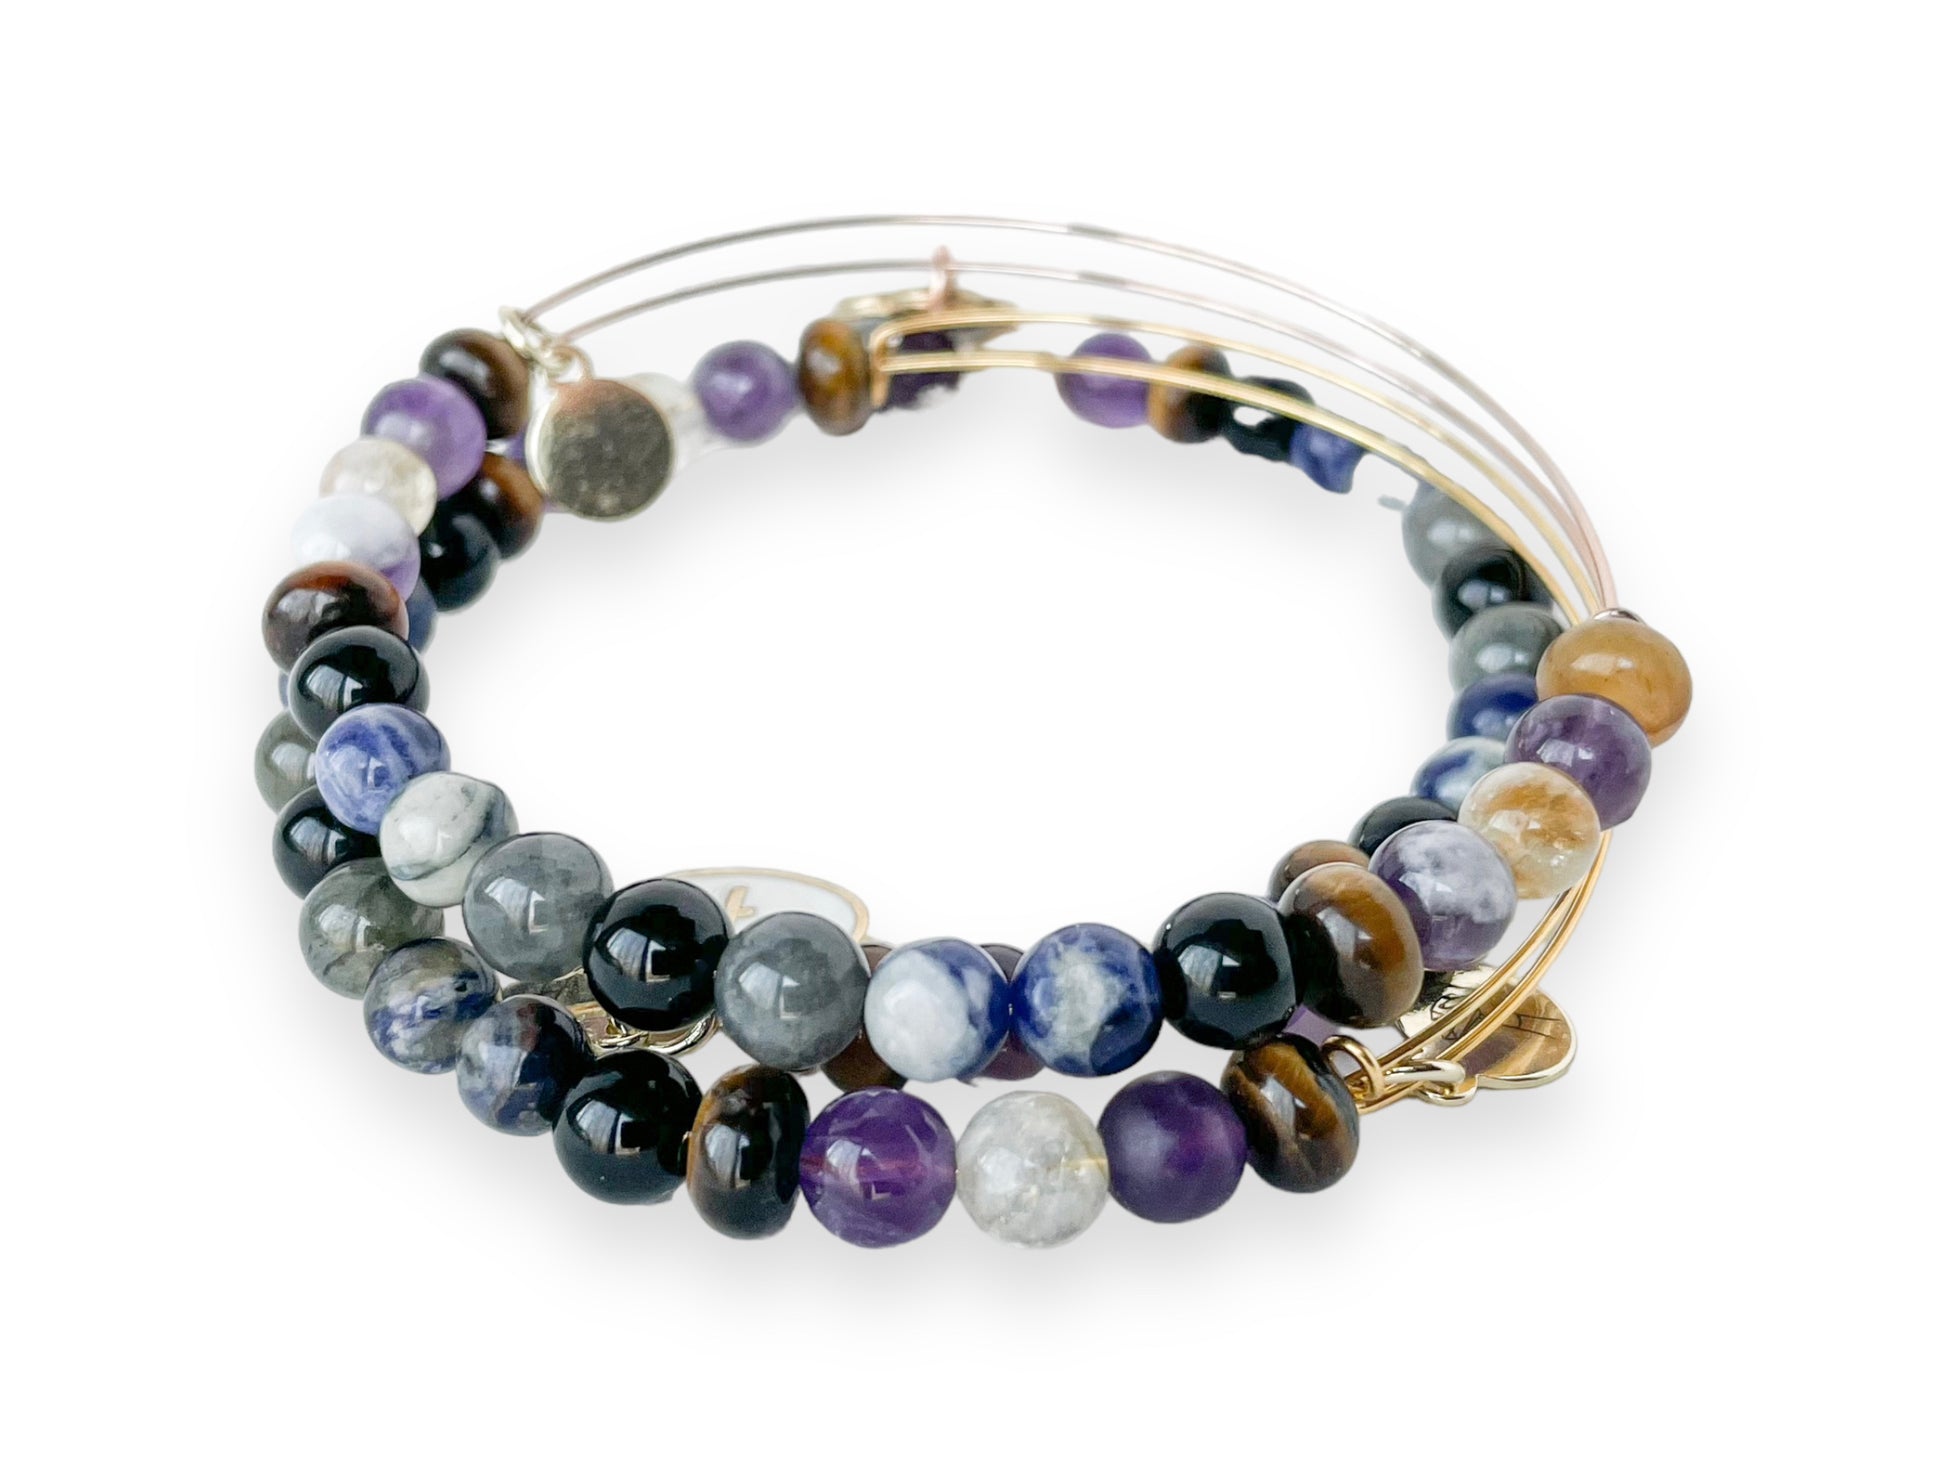 Unique Sagittarius Bracelet with Onyx and Sodalite for courage.